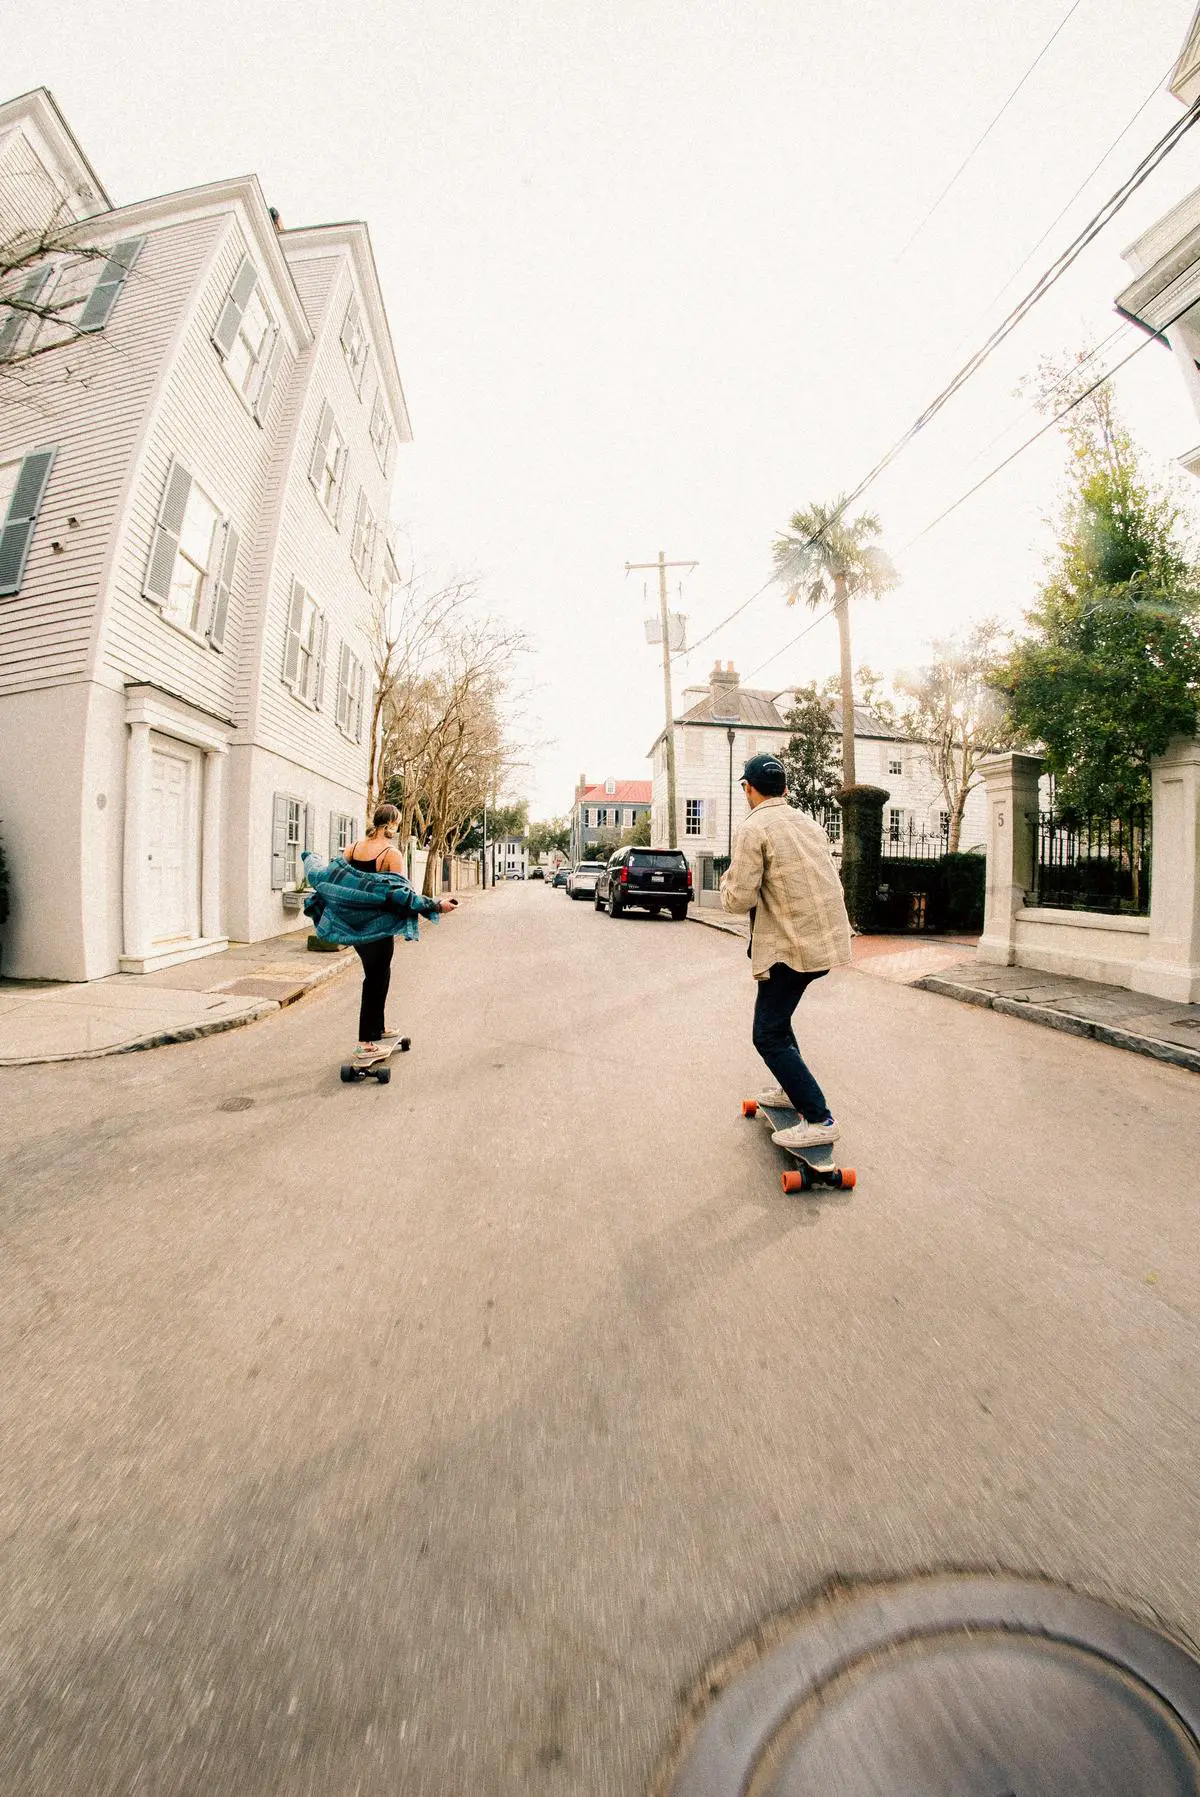 Image of electric skateboards showcasing their sleek design and advanced features